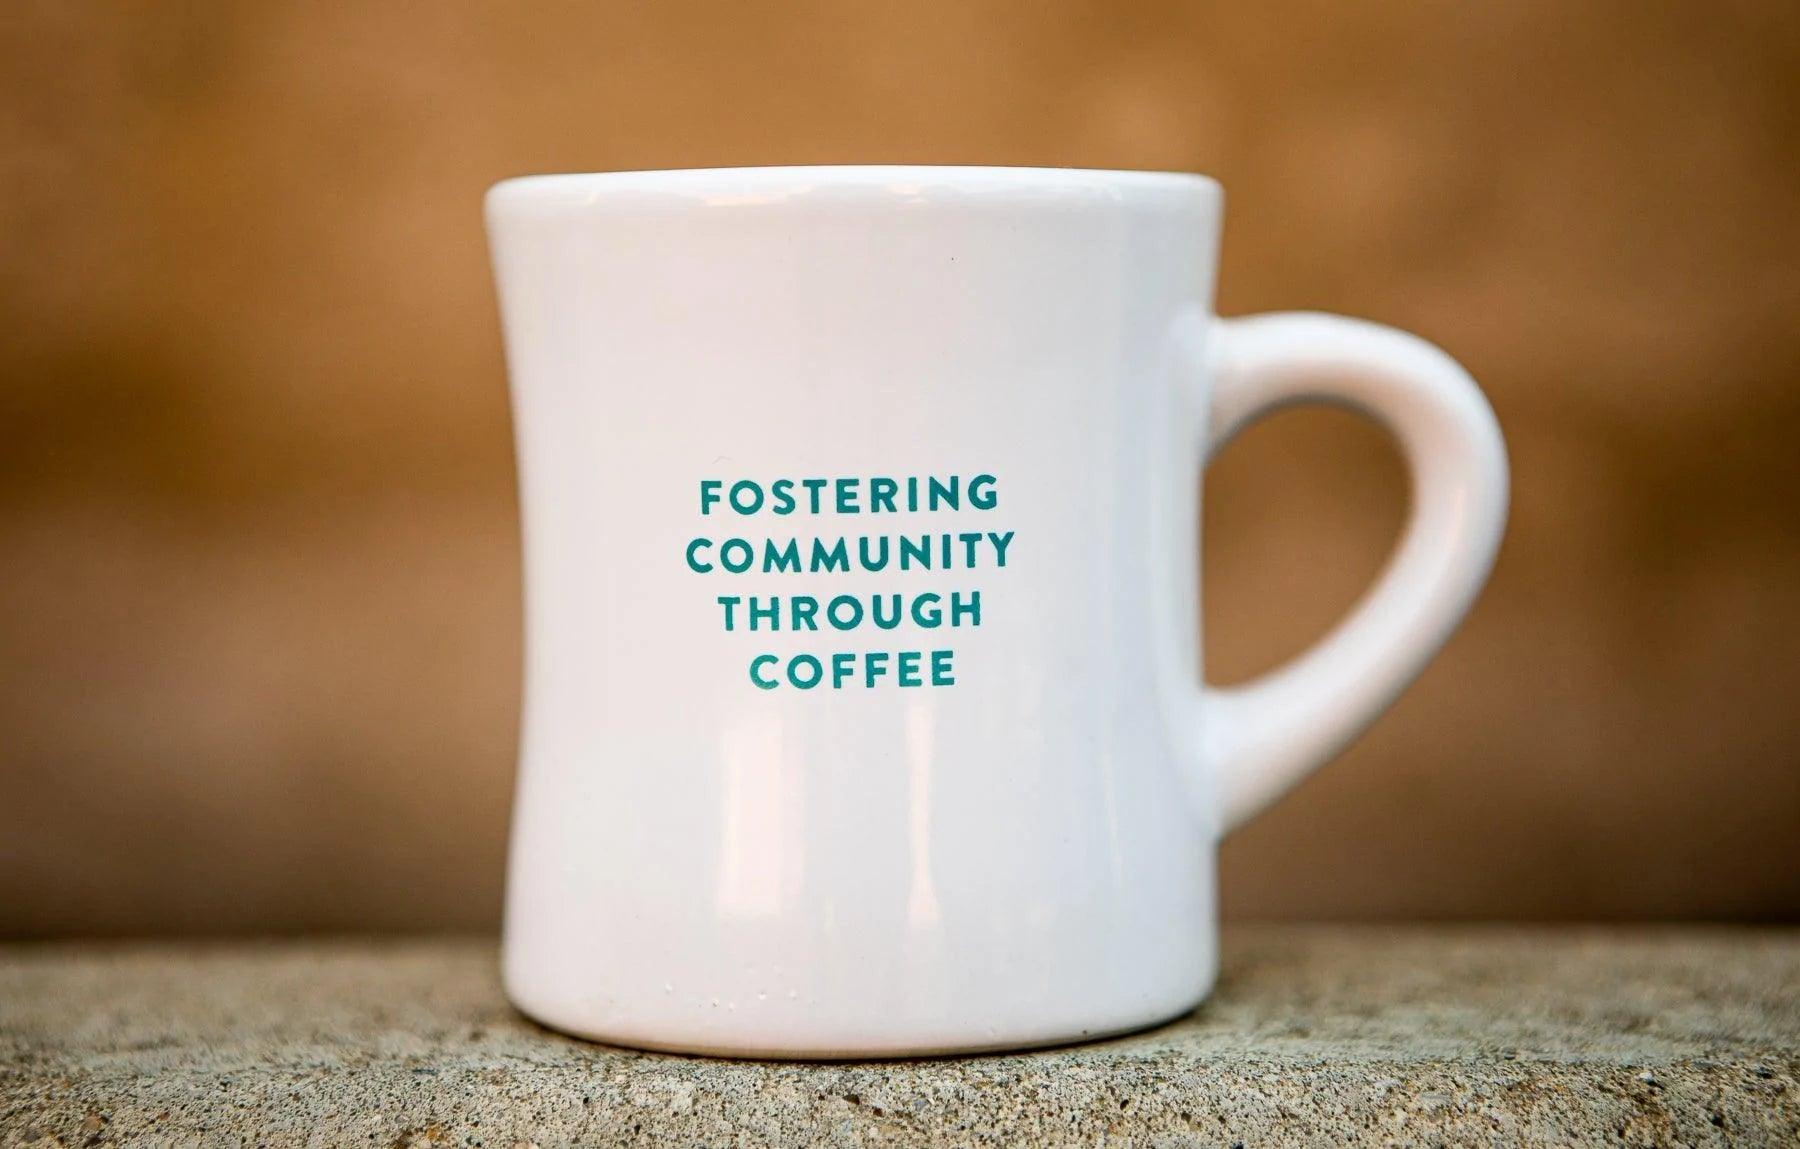 https://cdn.shopify.com/s/files/1/0437/5491/3960/products/diner-mug-foster-coffee-2.webp?crop=center&height=2340&v=1672861213&width=1800